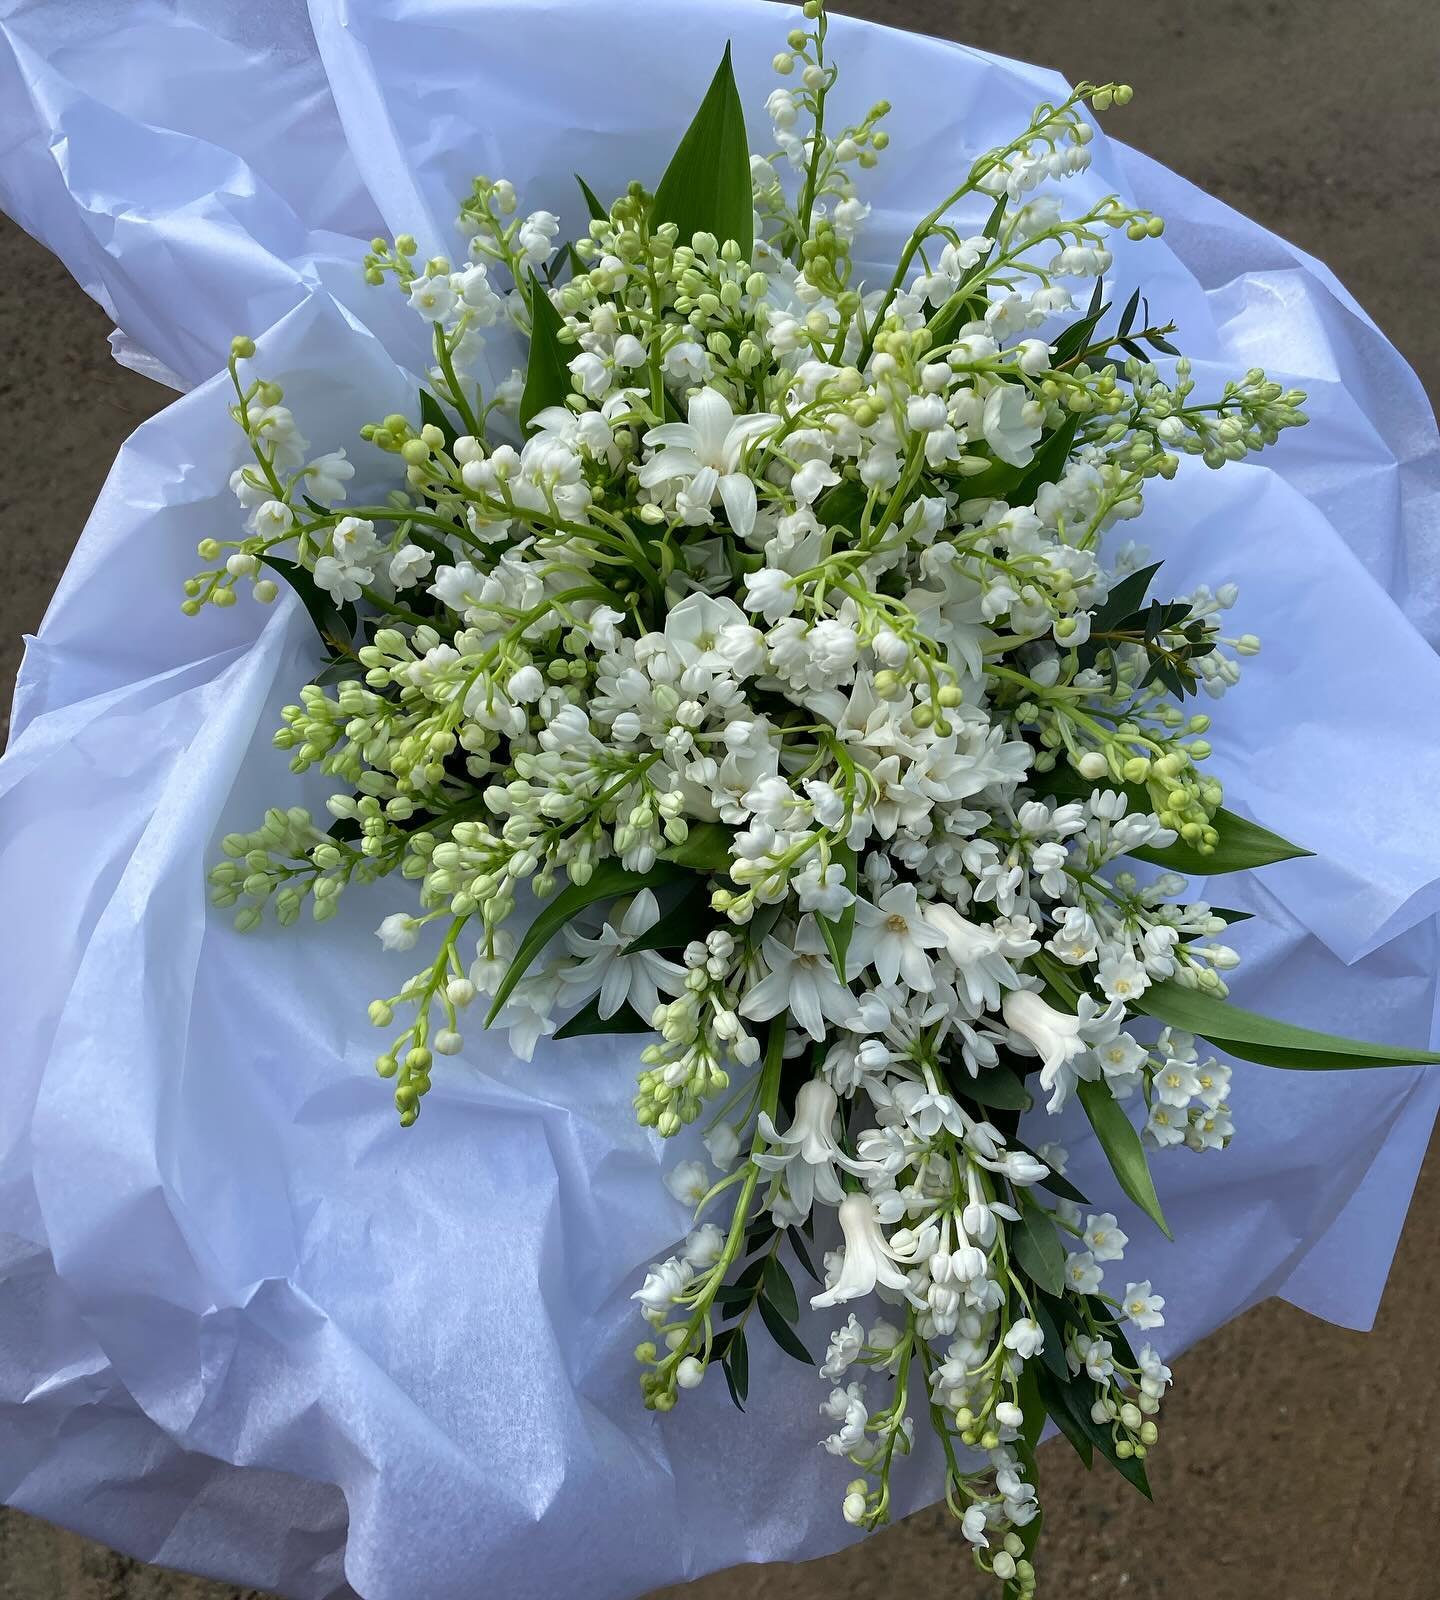 Gemma&rsquo;s beautiful wedding flowers with Lily of Valley for the bridal party flowers (which smelt amazing!) plus the most colourful spring flowers to dress @brinsopcourt 🌸💐💕🪻